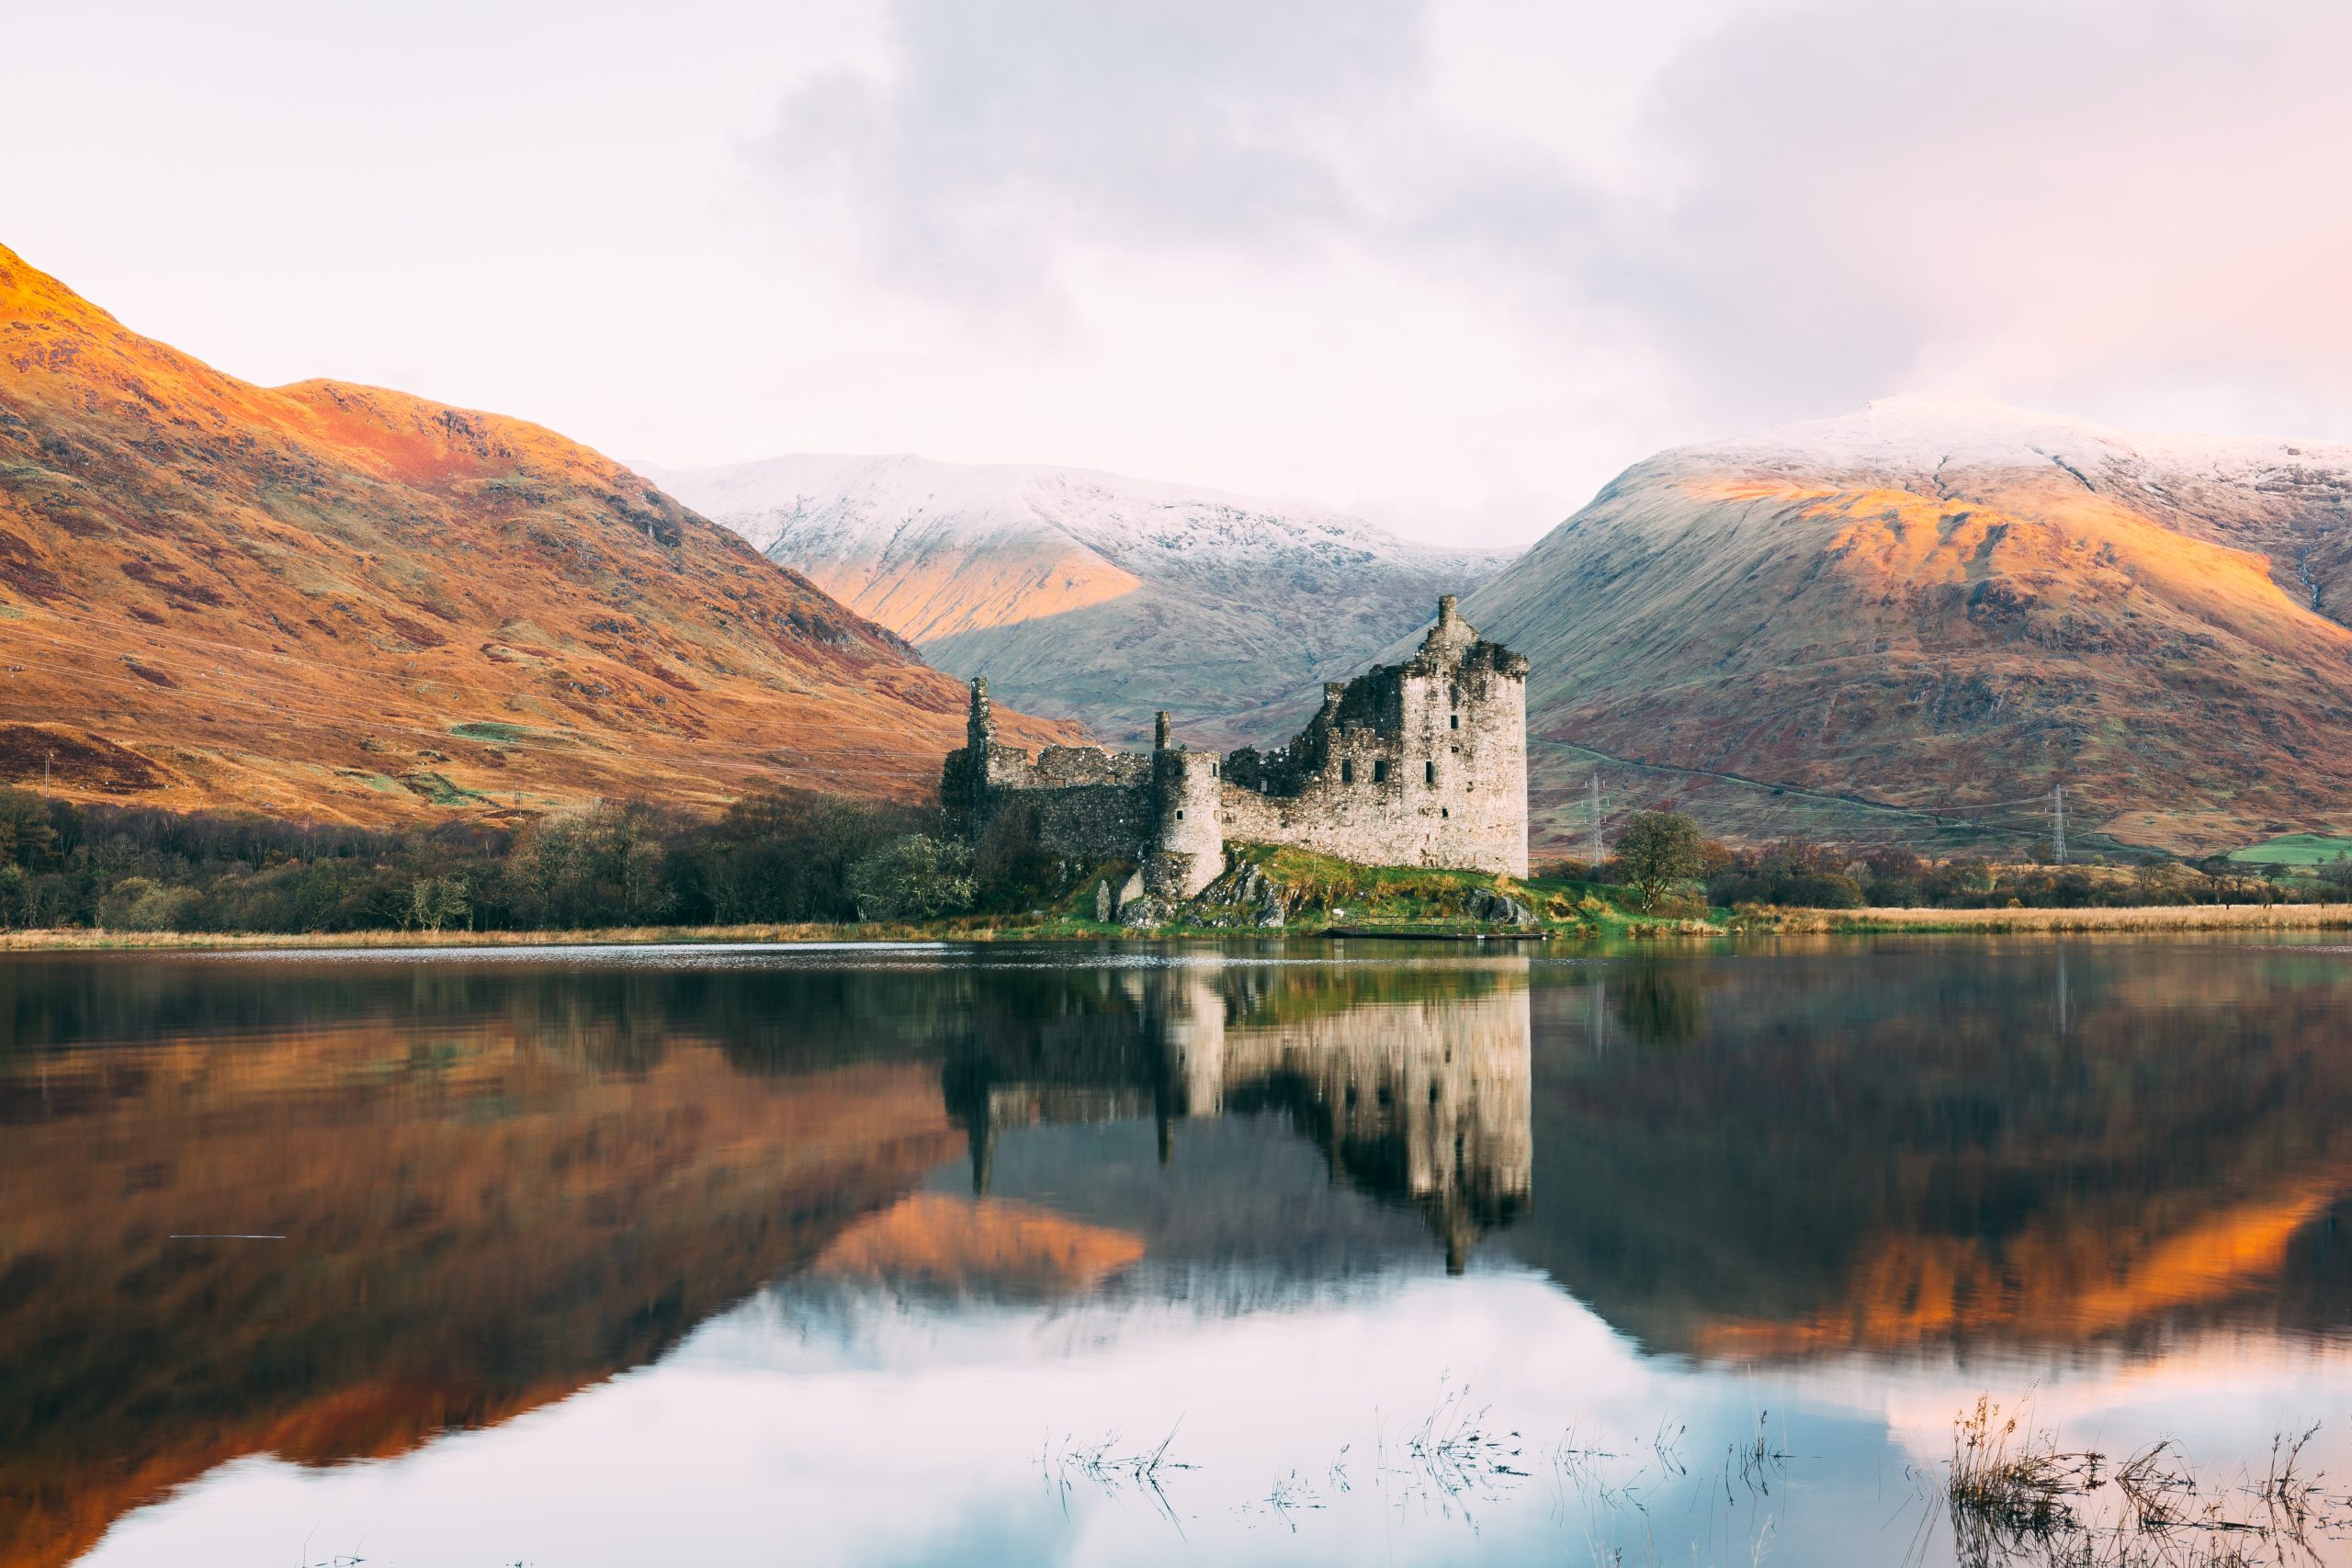 Things to do in Oban - Take a trip to nearby Kilchurn Castle